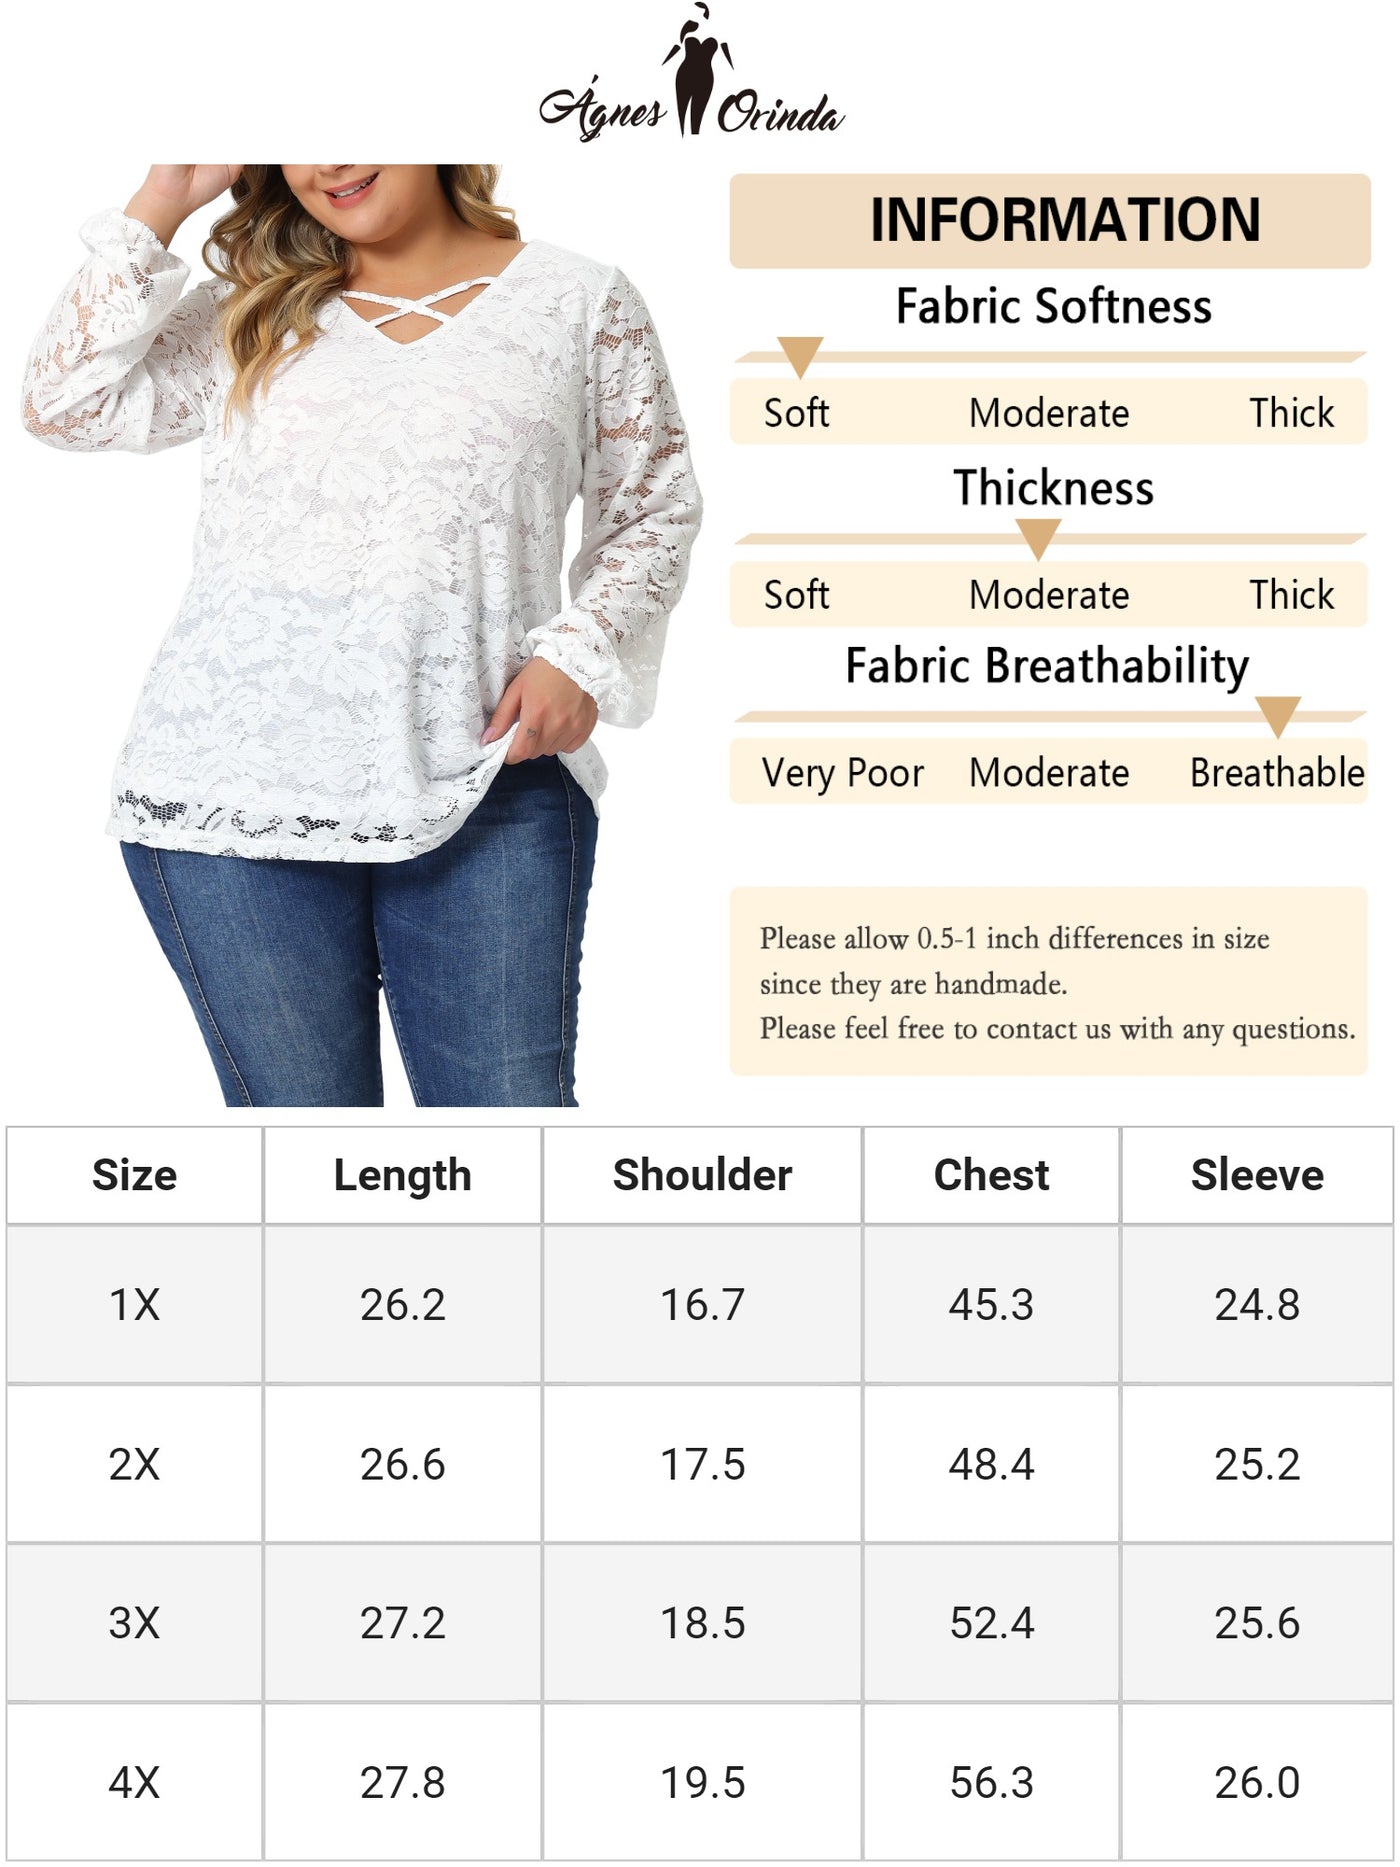 Bublédon Lace Blouse for Women Plus Size Sheer Long Sleeve Elastic Cuff Layer Cross V Neck Tops